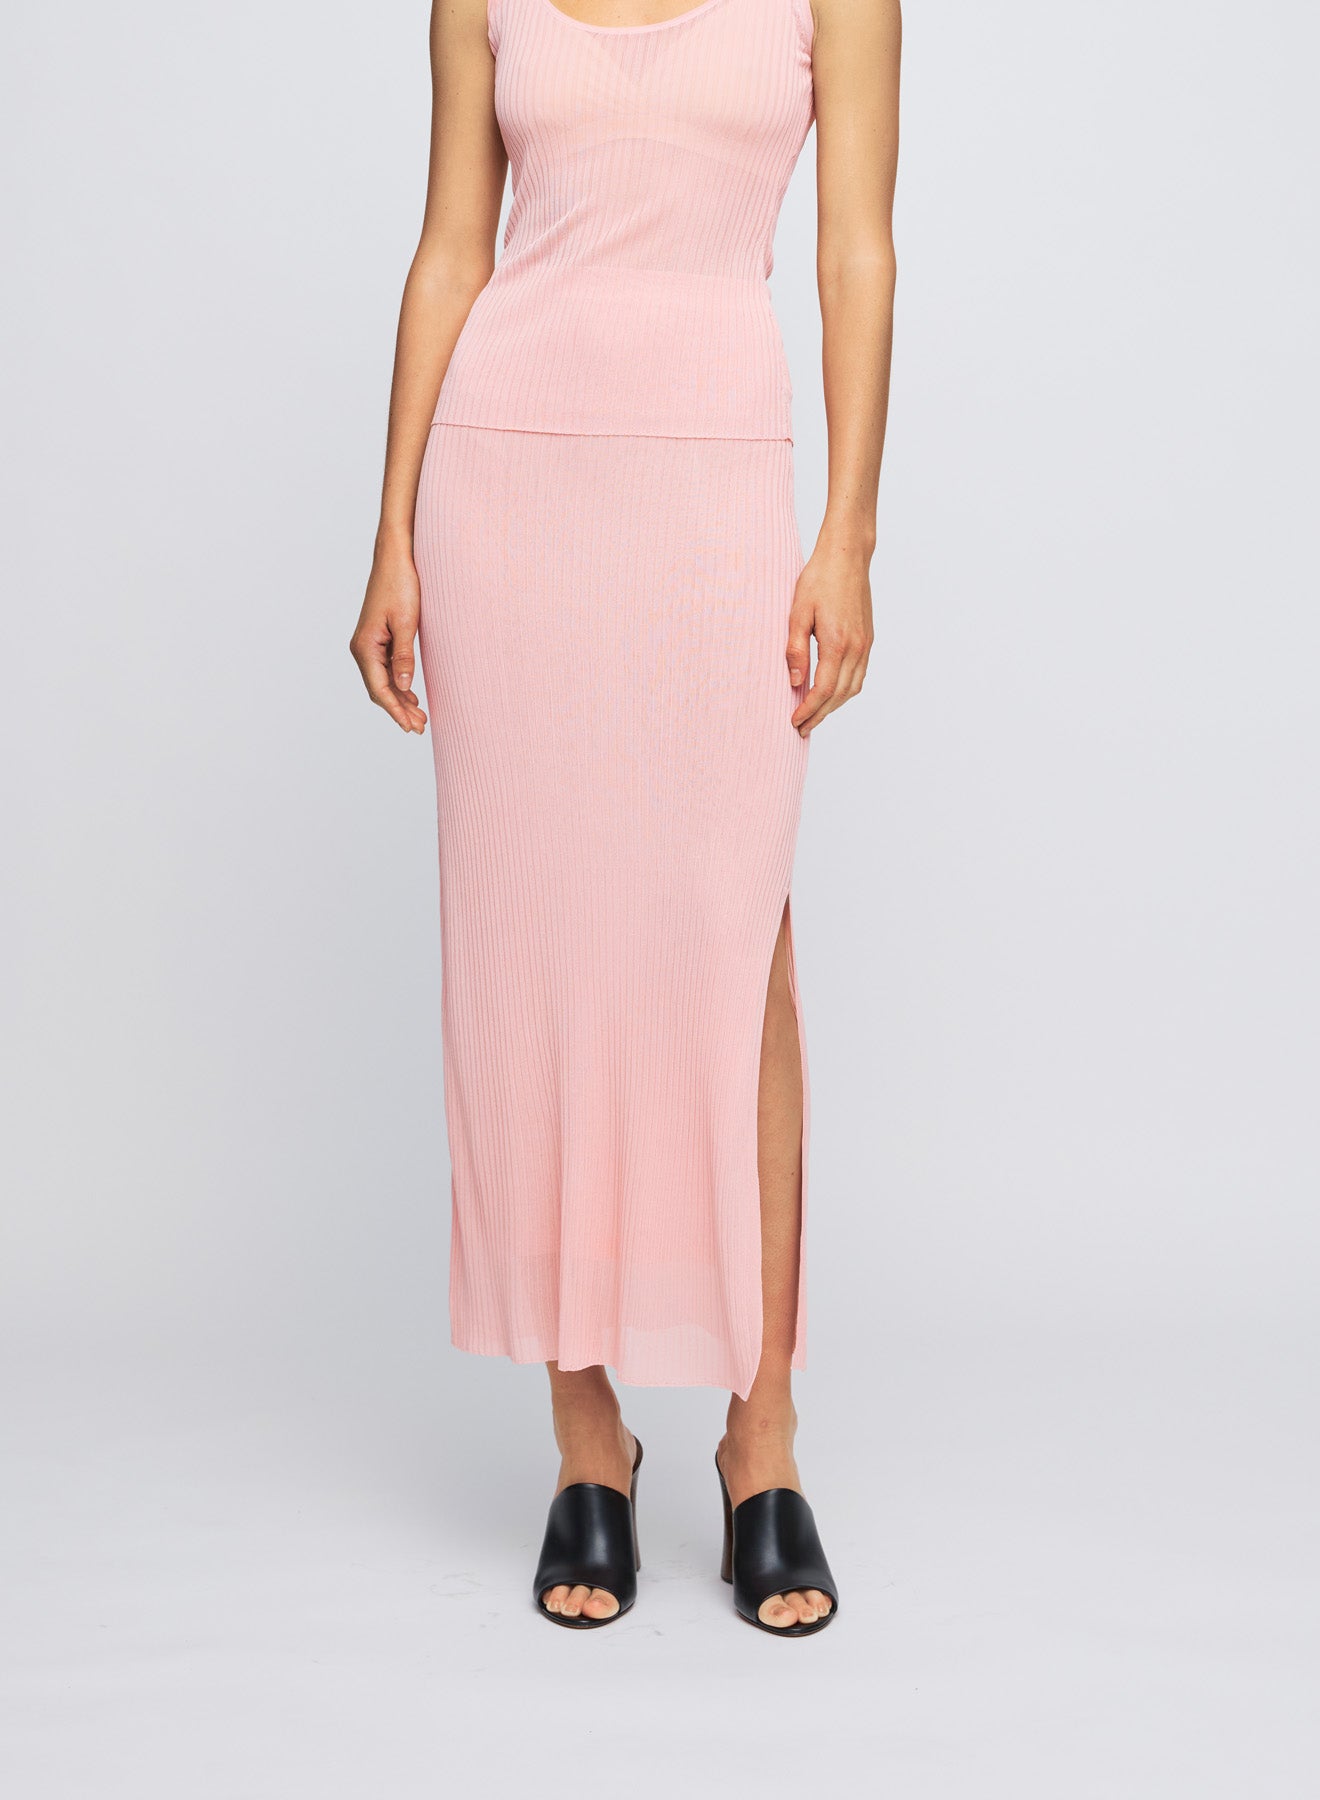 The Anna Quan Carrie Skirt in Sakura is a midi skirt with a side split that is cut in a delicate viscose fabric with stretch for ease of movement and effortless styling.